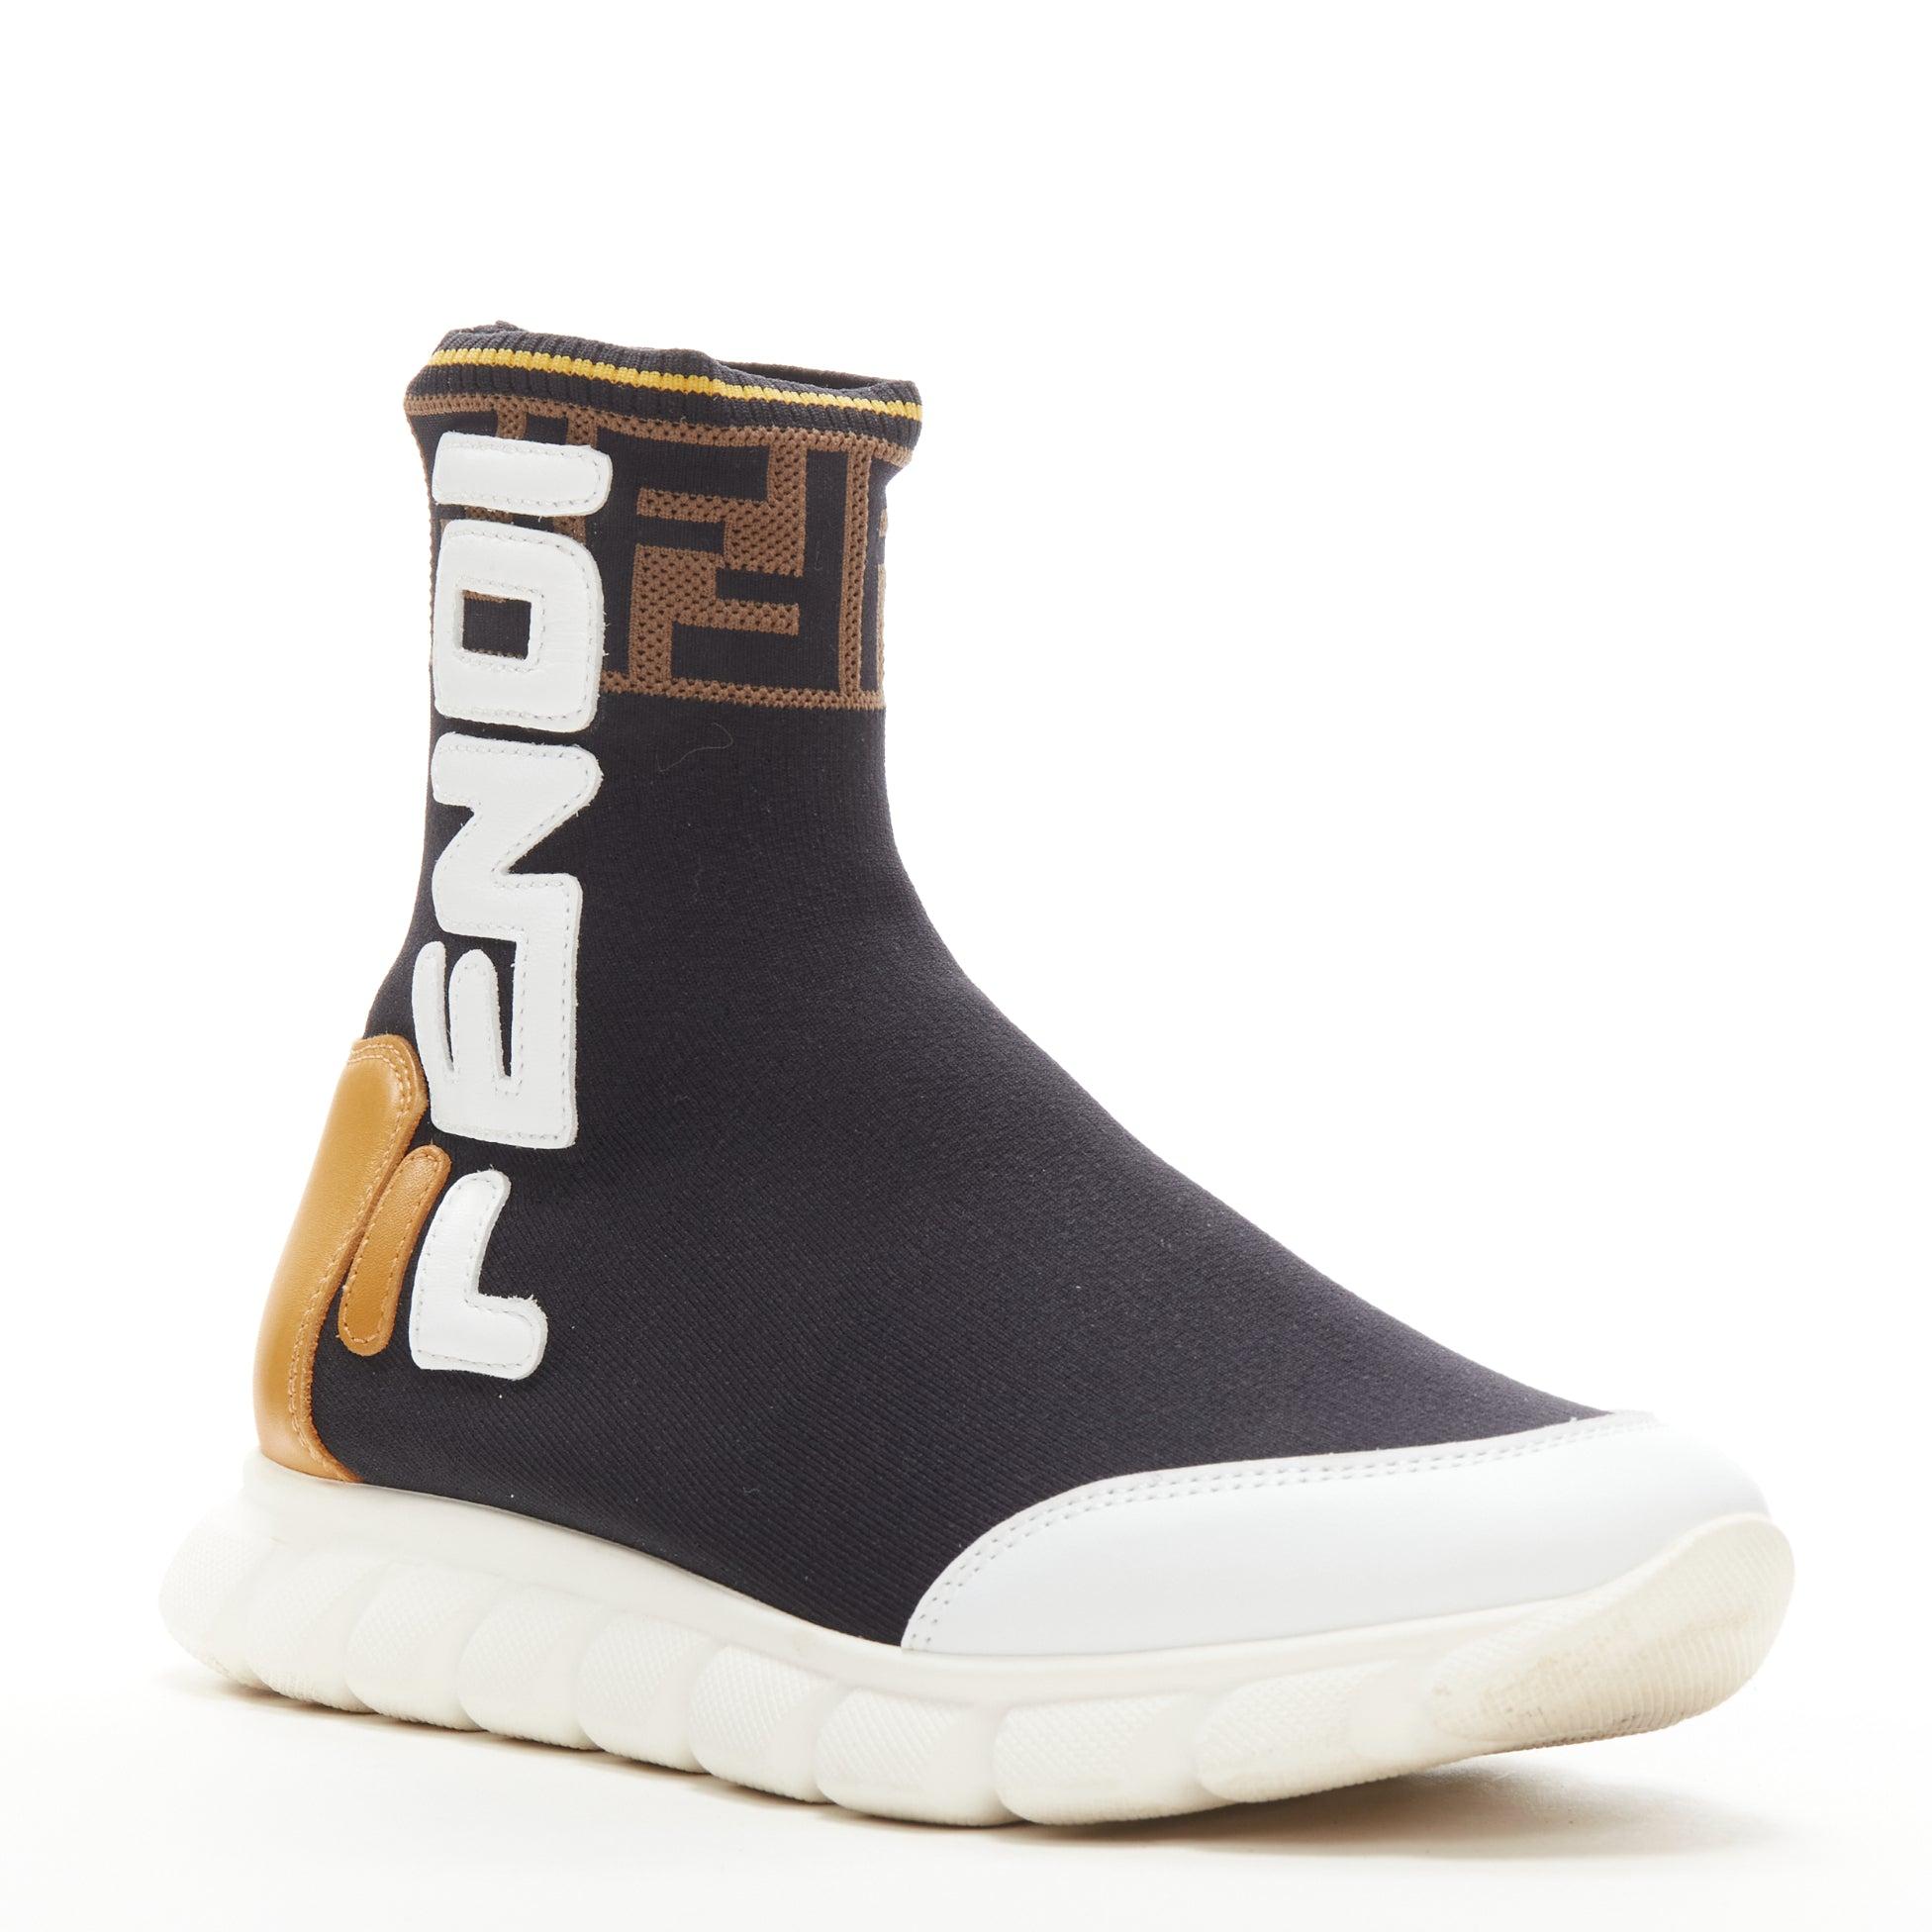 FENDI FILA Mania white logo lettering Zucca FF sock knit high top sneaker EU36
Reference: ANWU/A00387
Brand: Fendi
Material: Fabric
Color: Black, Brown
Pattern: Solid
Extra Details: Stretch fit. FENDI logo patchwork on side. FF Zucca trim along